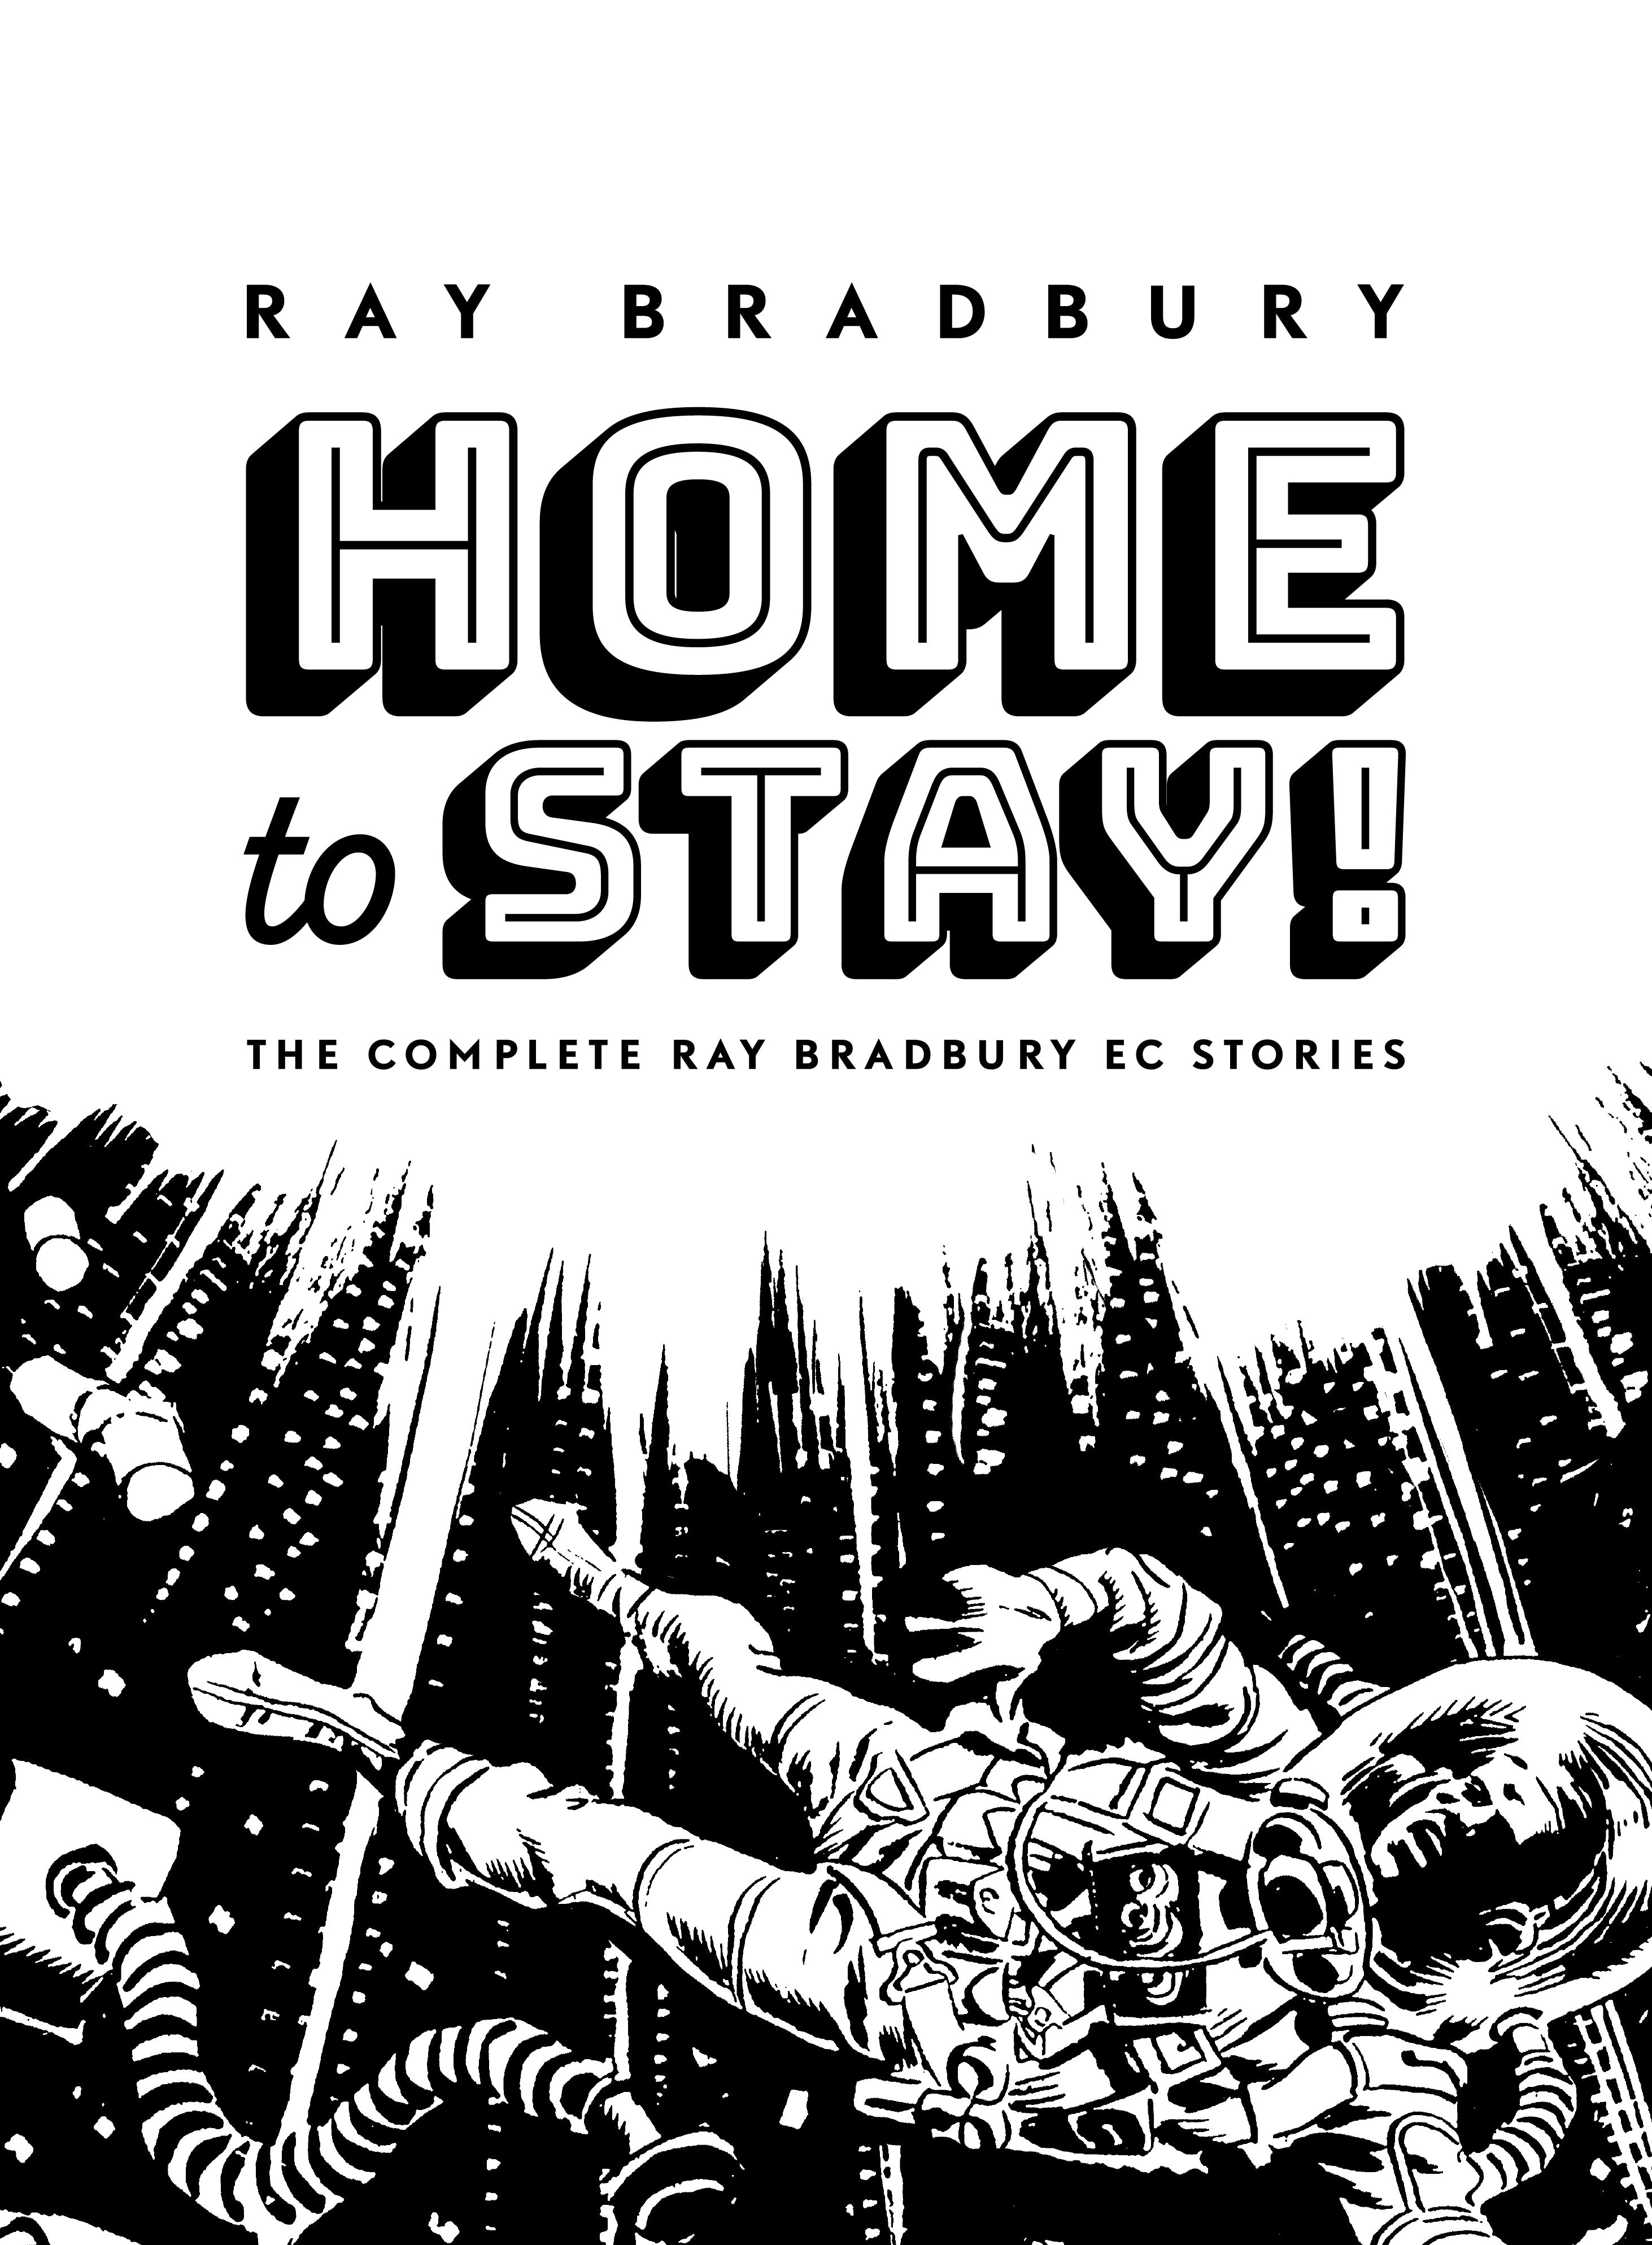 Read online Home to Stay!: The Complete Ray Bradbury EC Stories comic -  Issue # TPB (Part 1) - 4